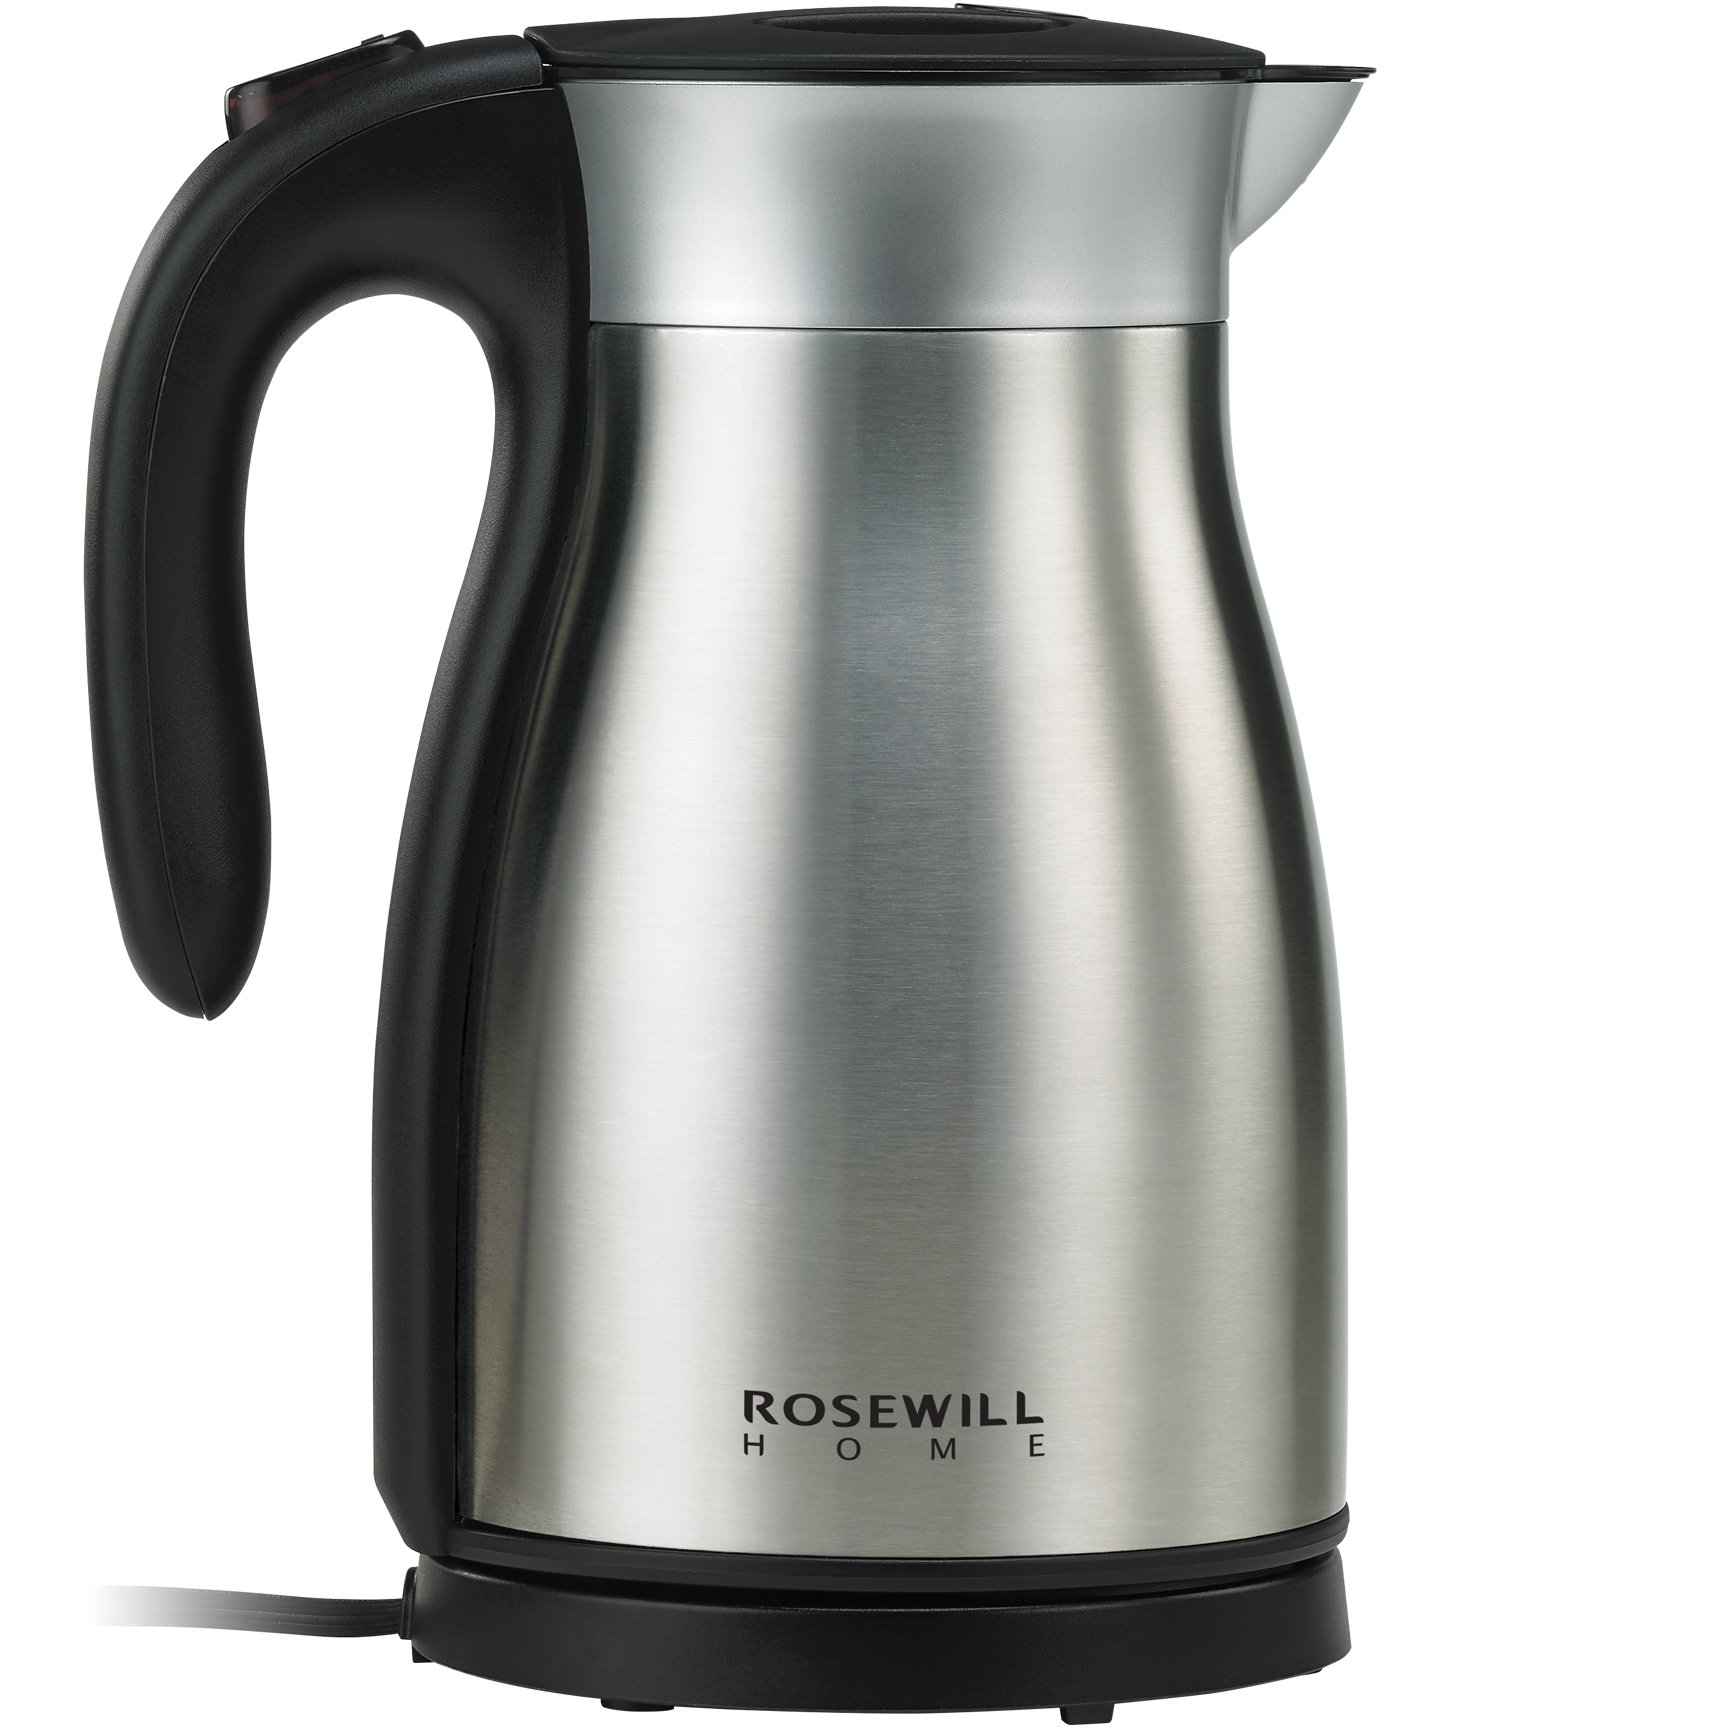 Rosewill 1.7 L Electric Kettle, Double Wall Vacuum Insulated, Stainless Steel Thermal Pot, Keep Cool or Hot Up to 6 Hours, Fast Rapid Boiling, RHKT...